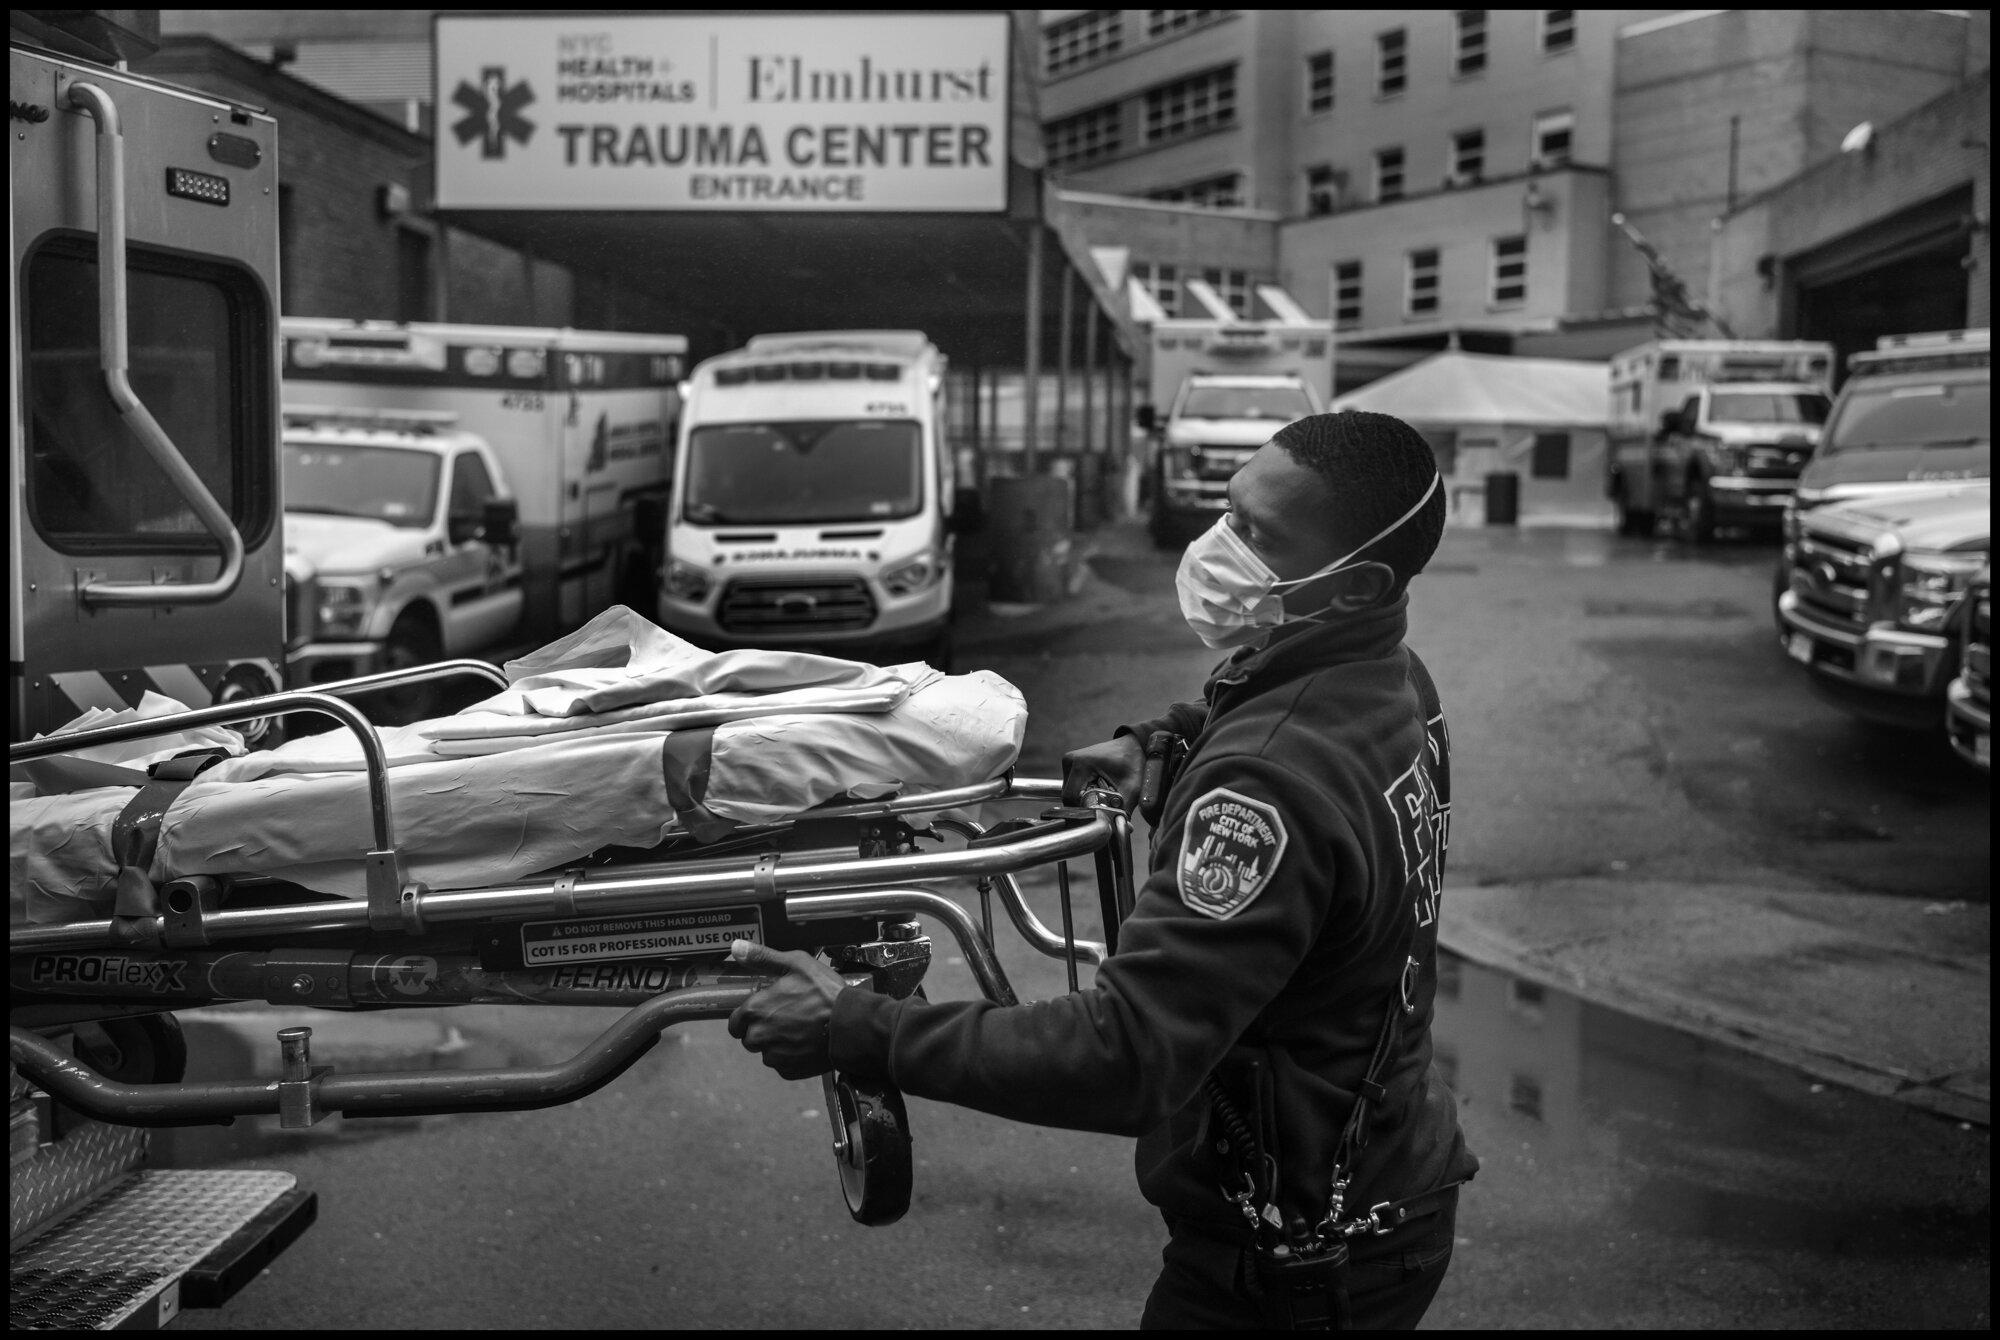  Fabrice, 28, an ambulance driver behind Elmhurst Hospital in Queens.  March 29, 2020. © Peter Turnley.  ID# 07-010 